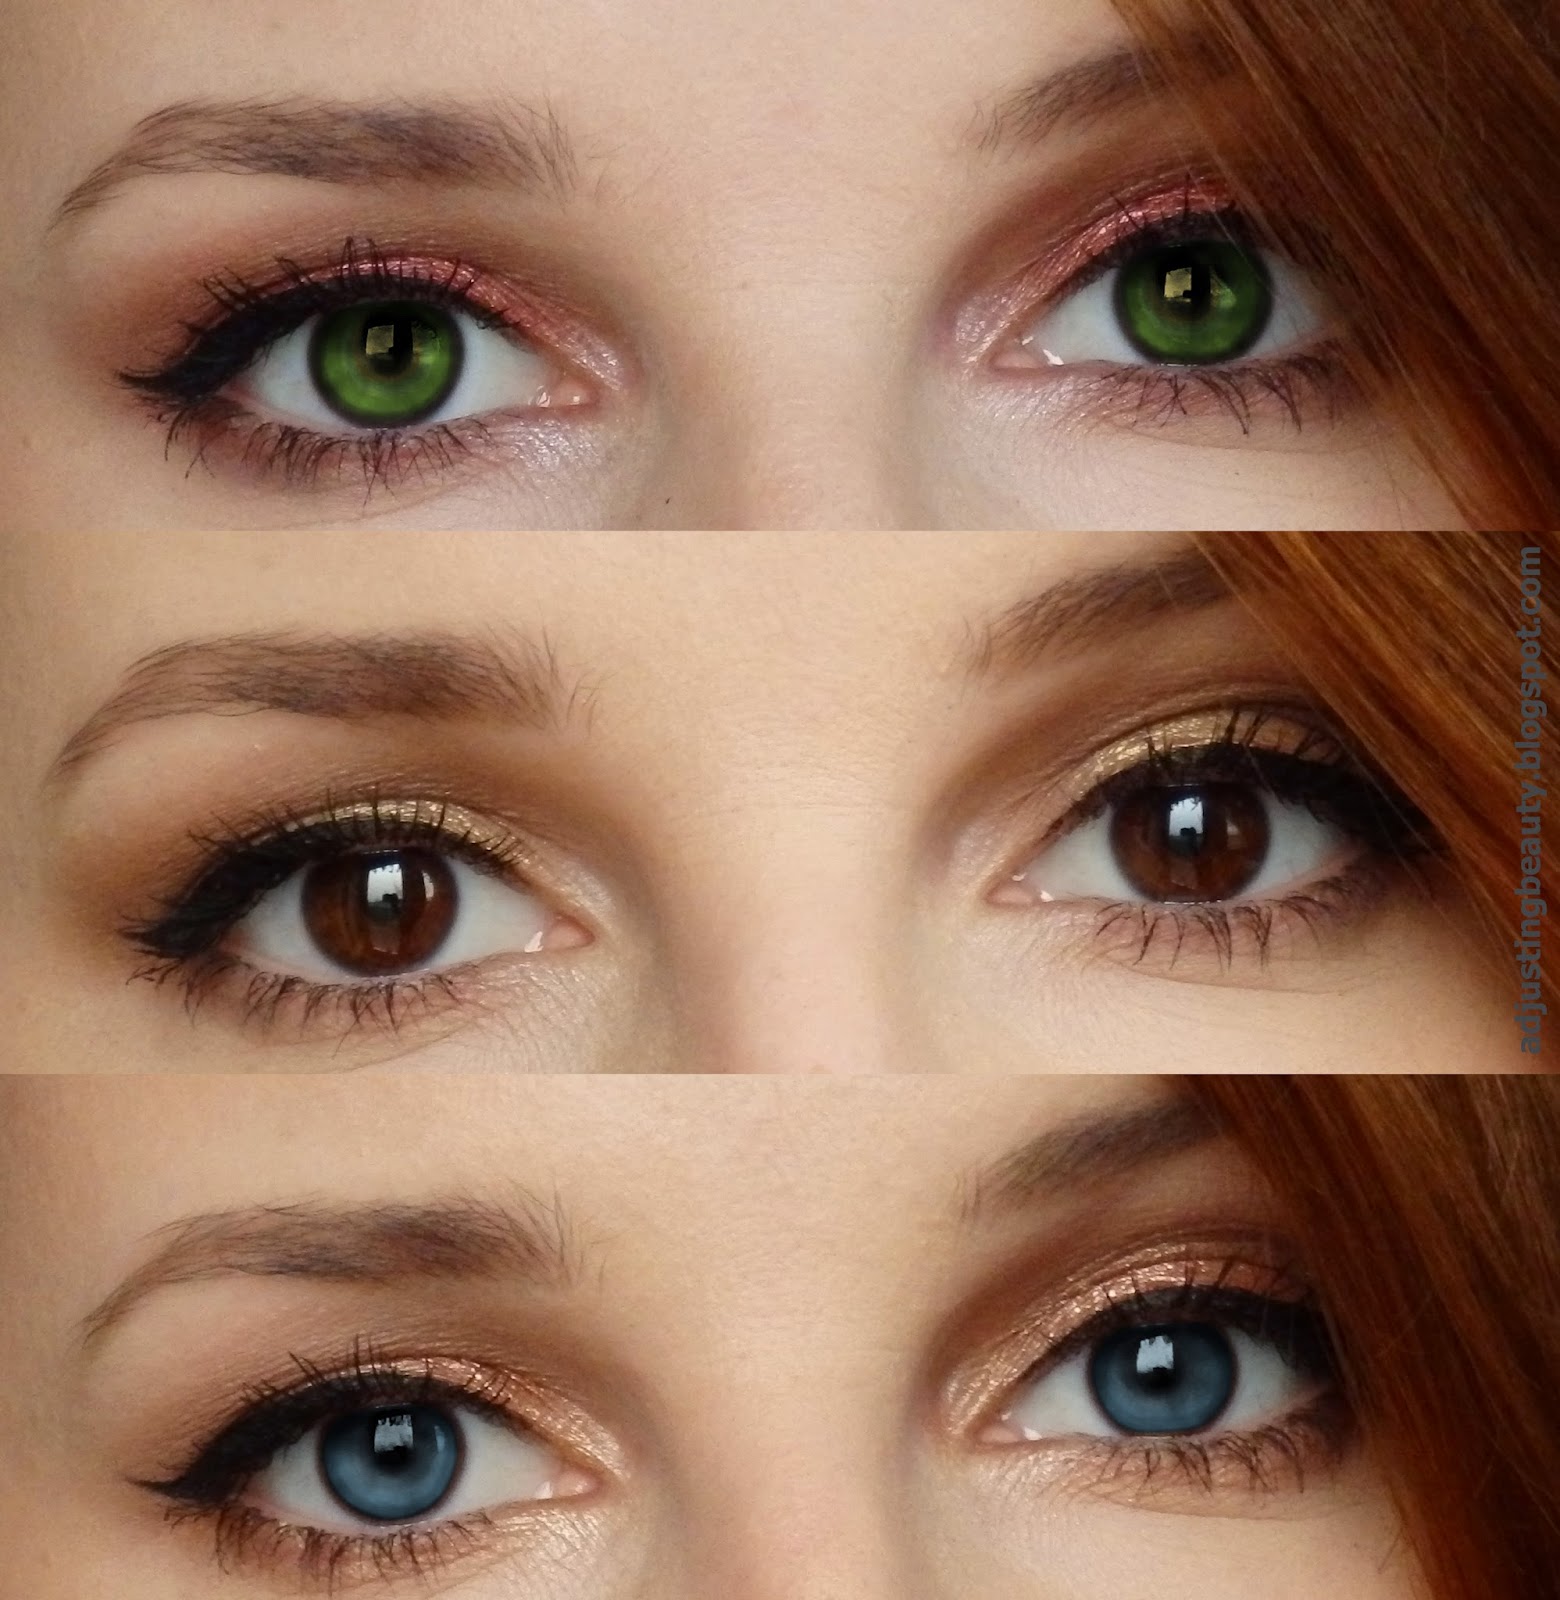 Adding Color To Basic Eye Makeup For Different Eye Colors Coloring Wallpapers Download Free Images Wallpaper [coloring654.blogspot.com]